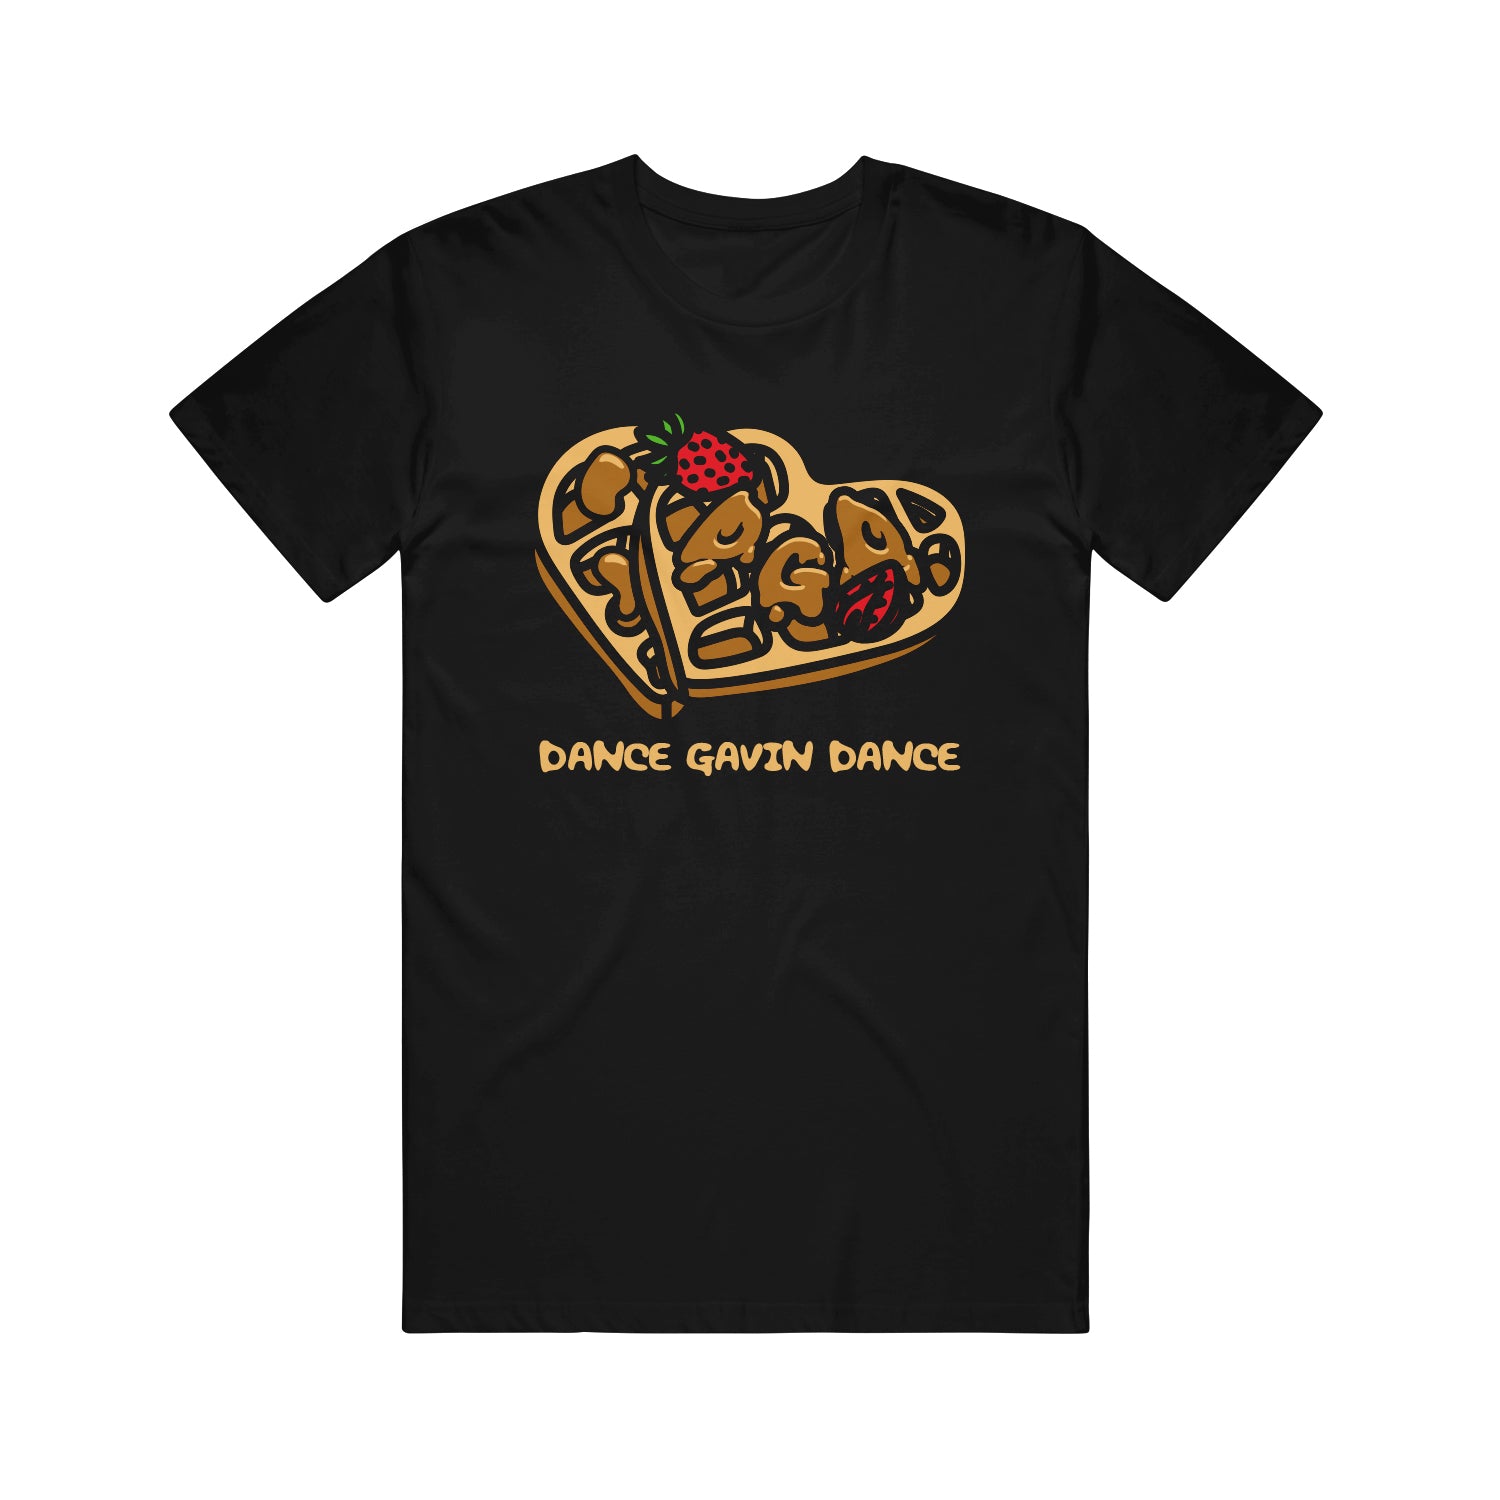 image of a black tee shirt on a white background. the tee has a center chest print of two waffles in the shape of a heart. two strawberries on the waffles and below says dance gavin dance